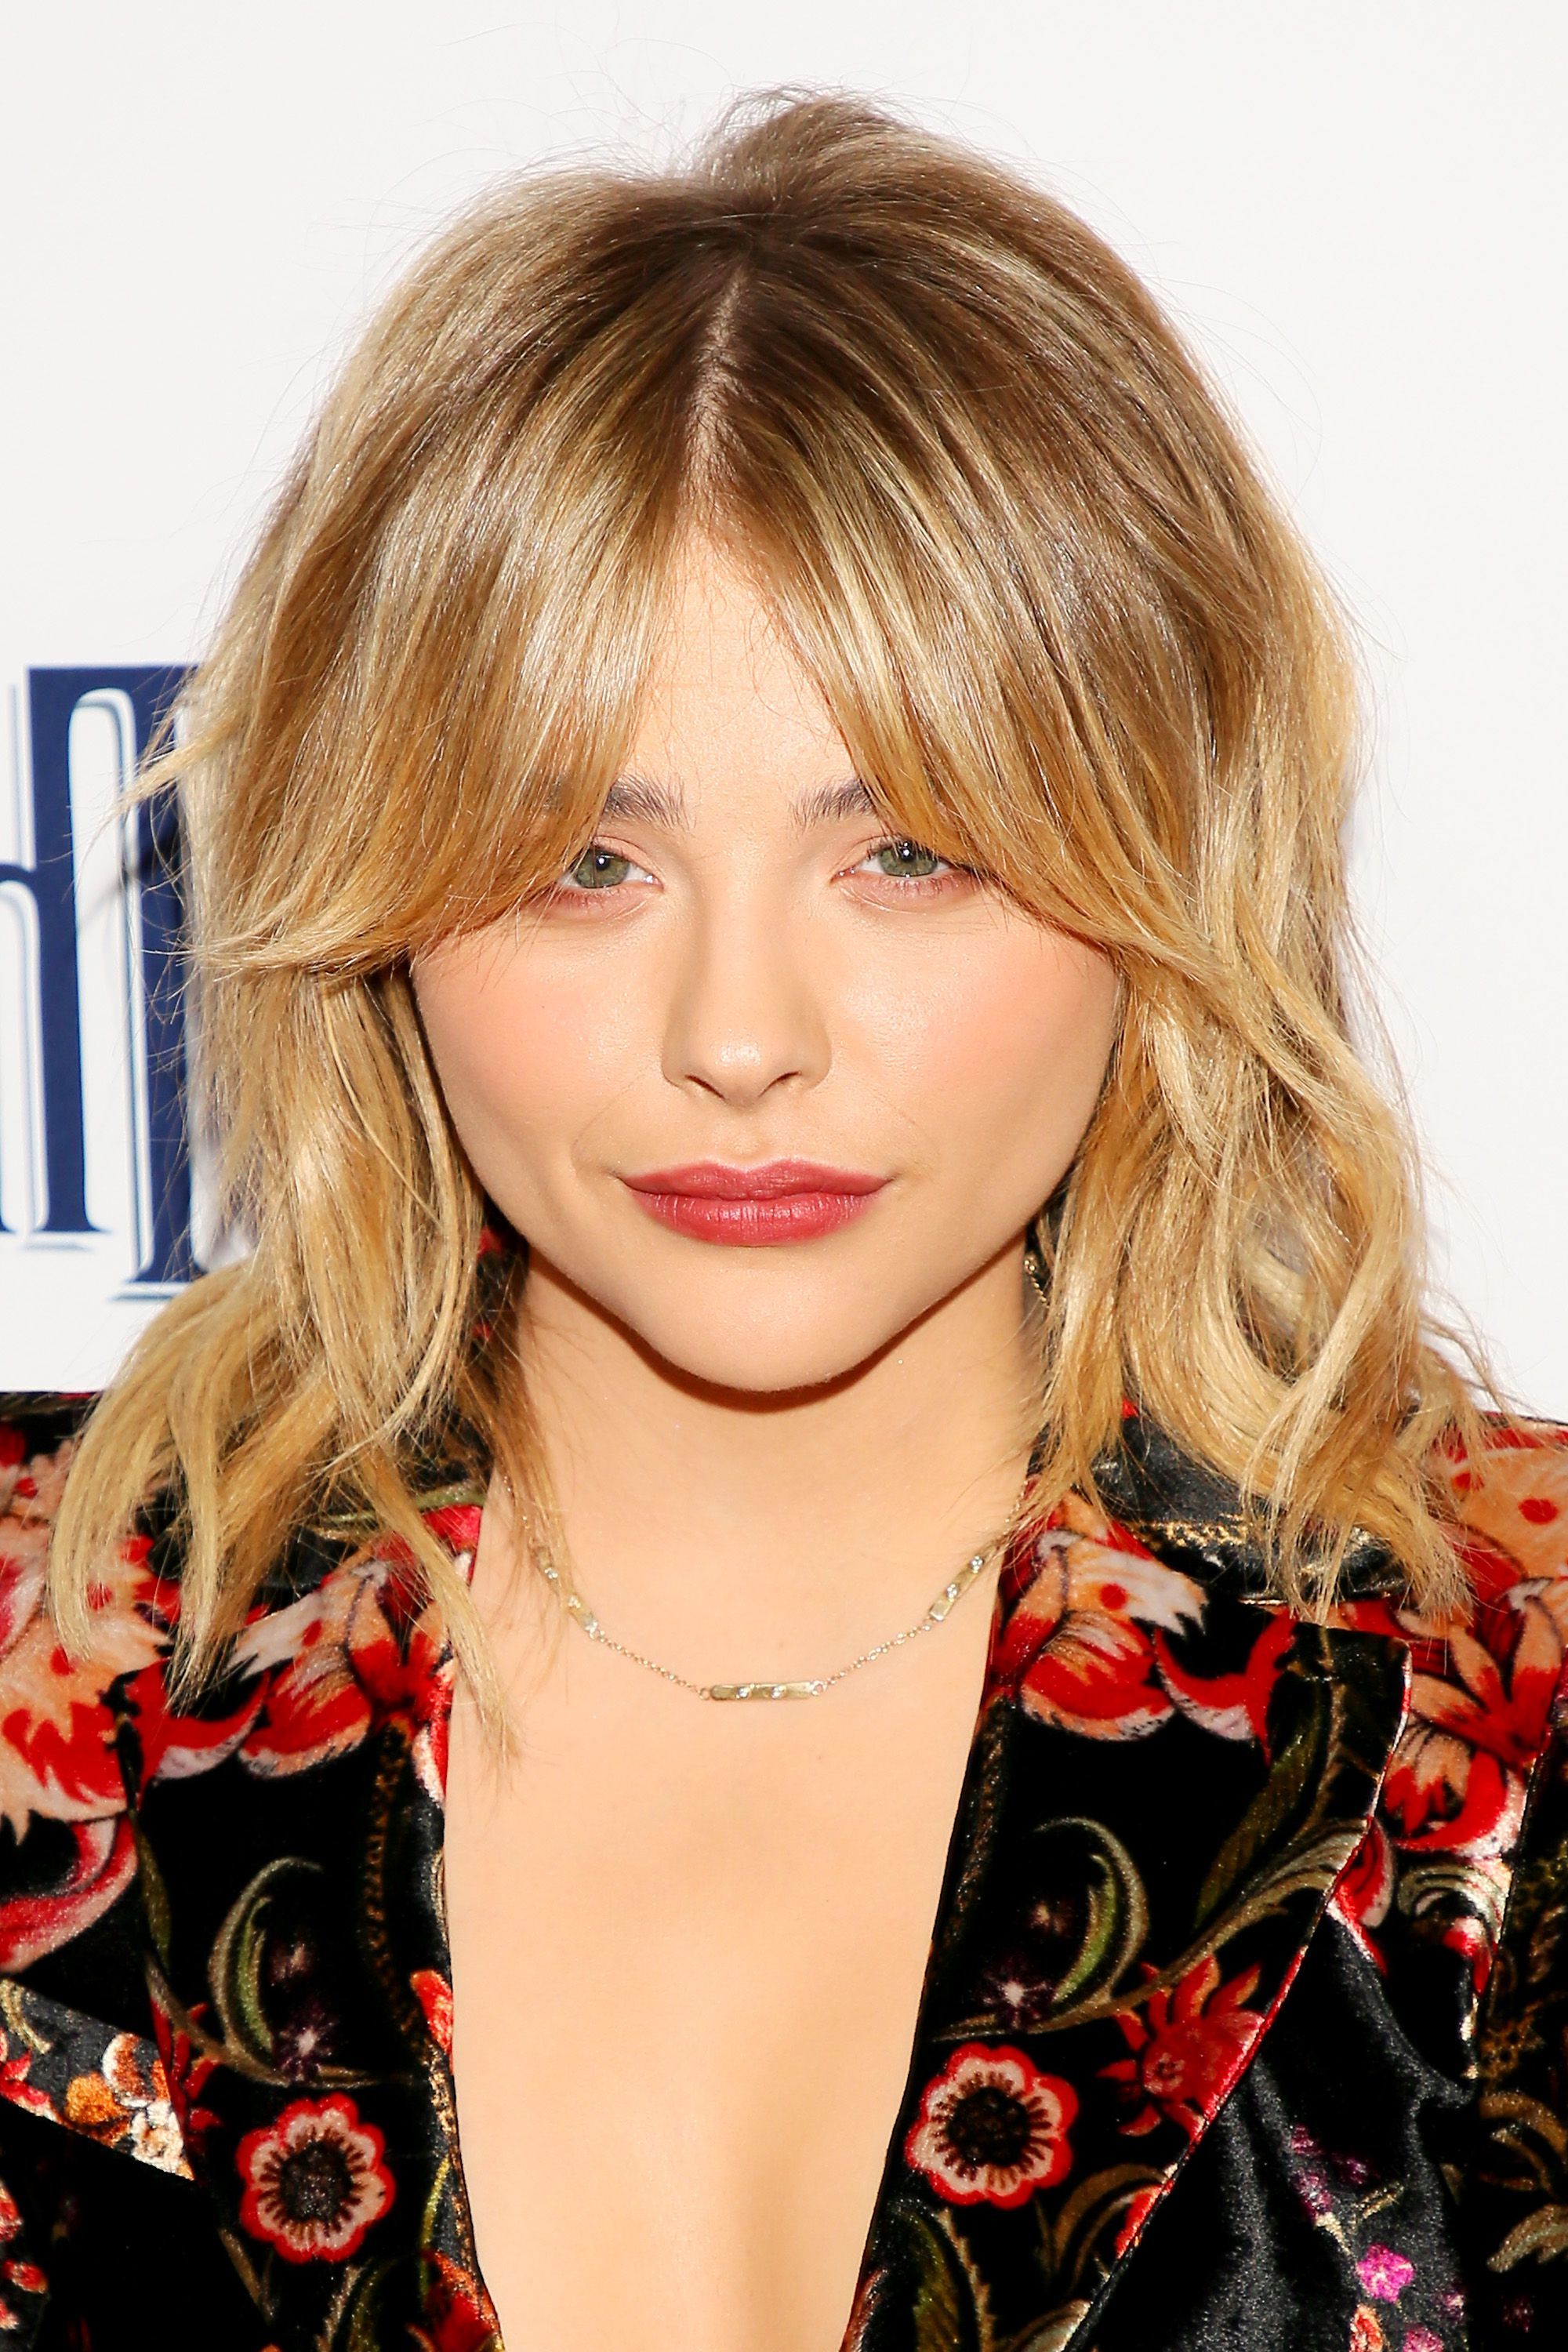 112 Hairstyles With Bangs You'll Want To Copy – Celebrity Haircuts Within Fashionable Medium Hairstyles With Big Bangs (Gallery 16 of 20)